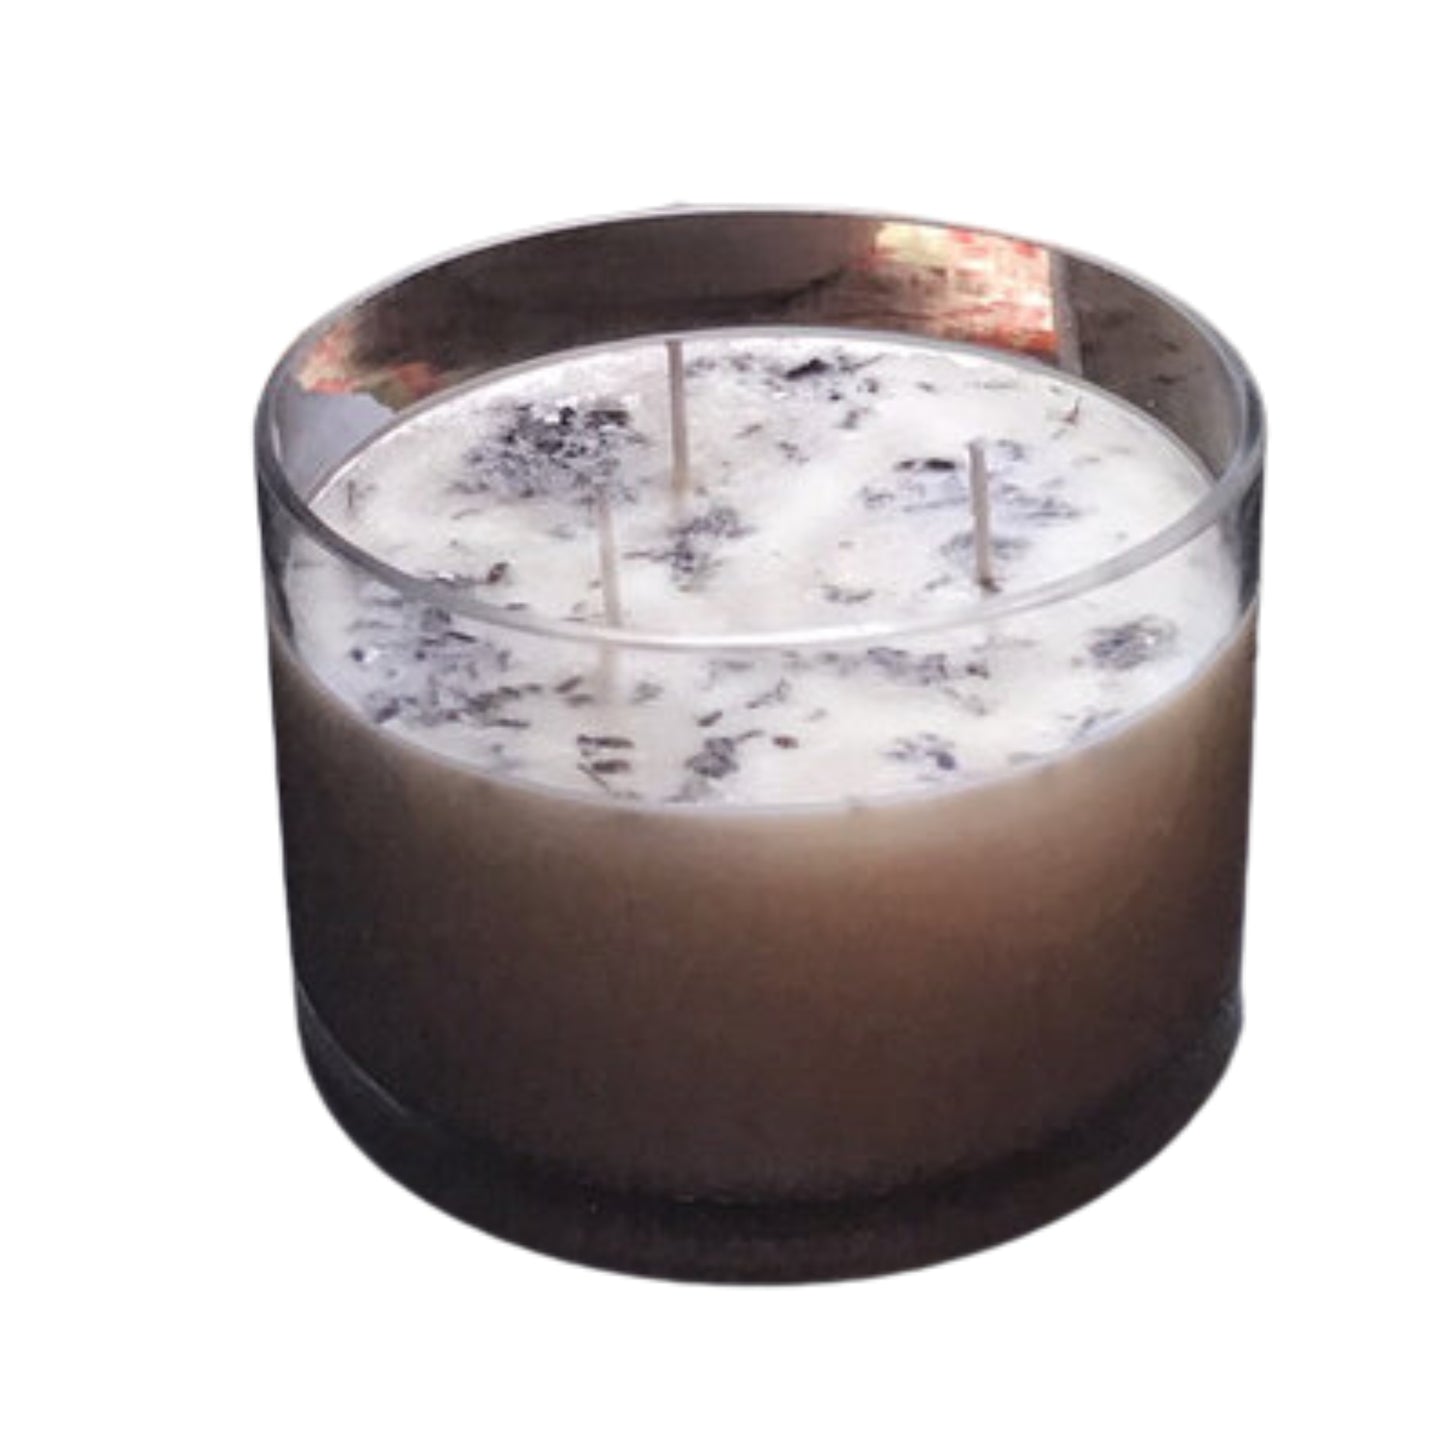 Aromatherapy 3 Wick Large Soy Wax Candle - Lavender Scented